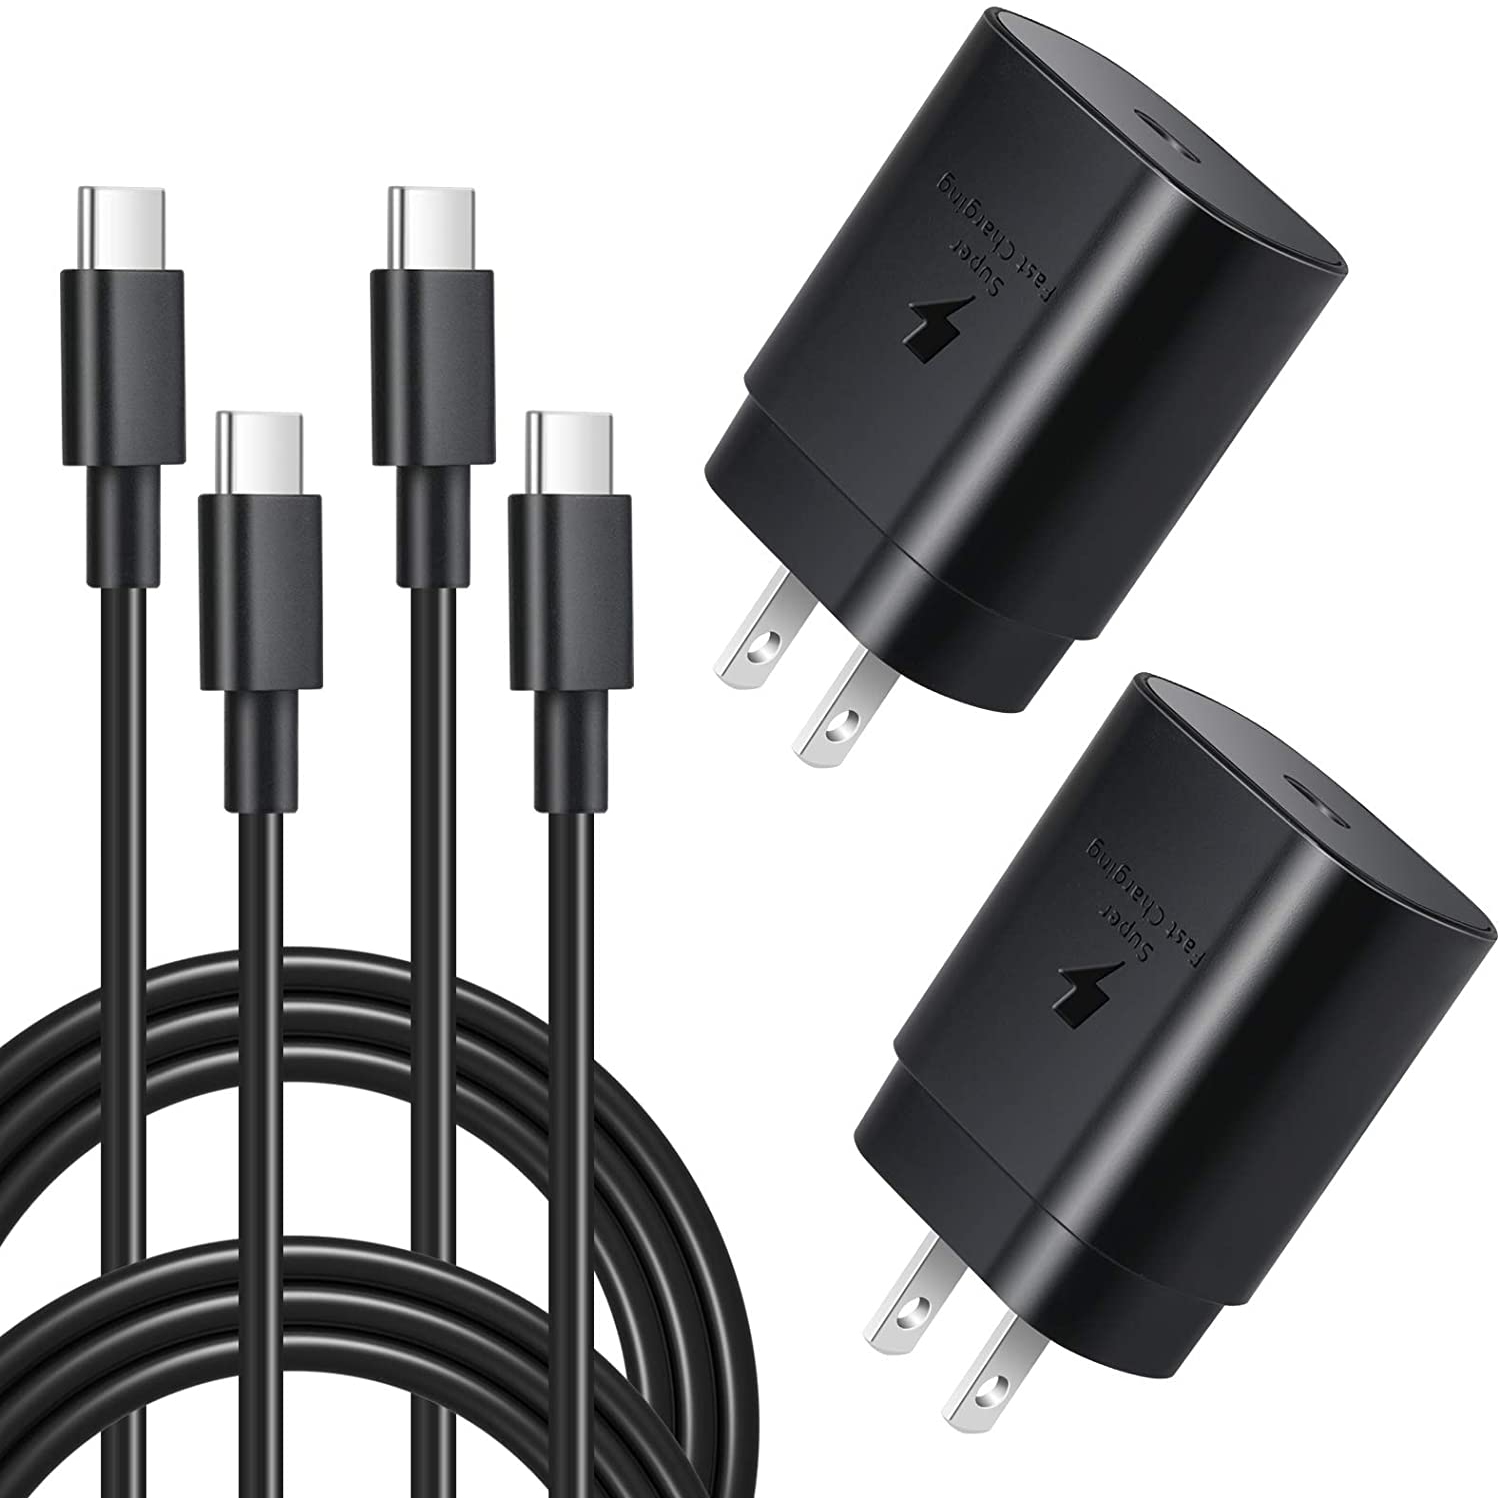 |HWS| (2 Pack) 100% Original Samsung 25W Charger with 6ft Cable